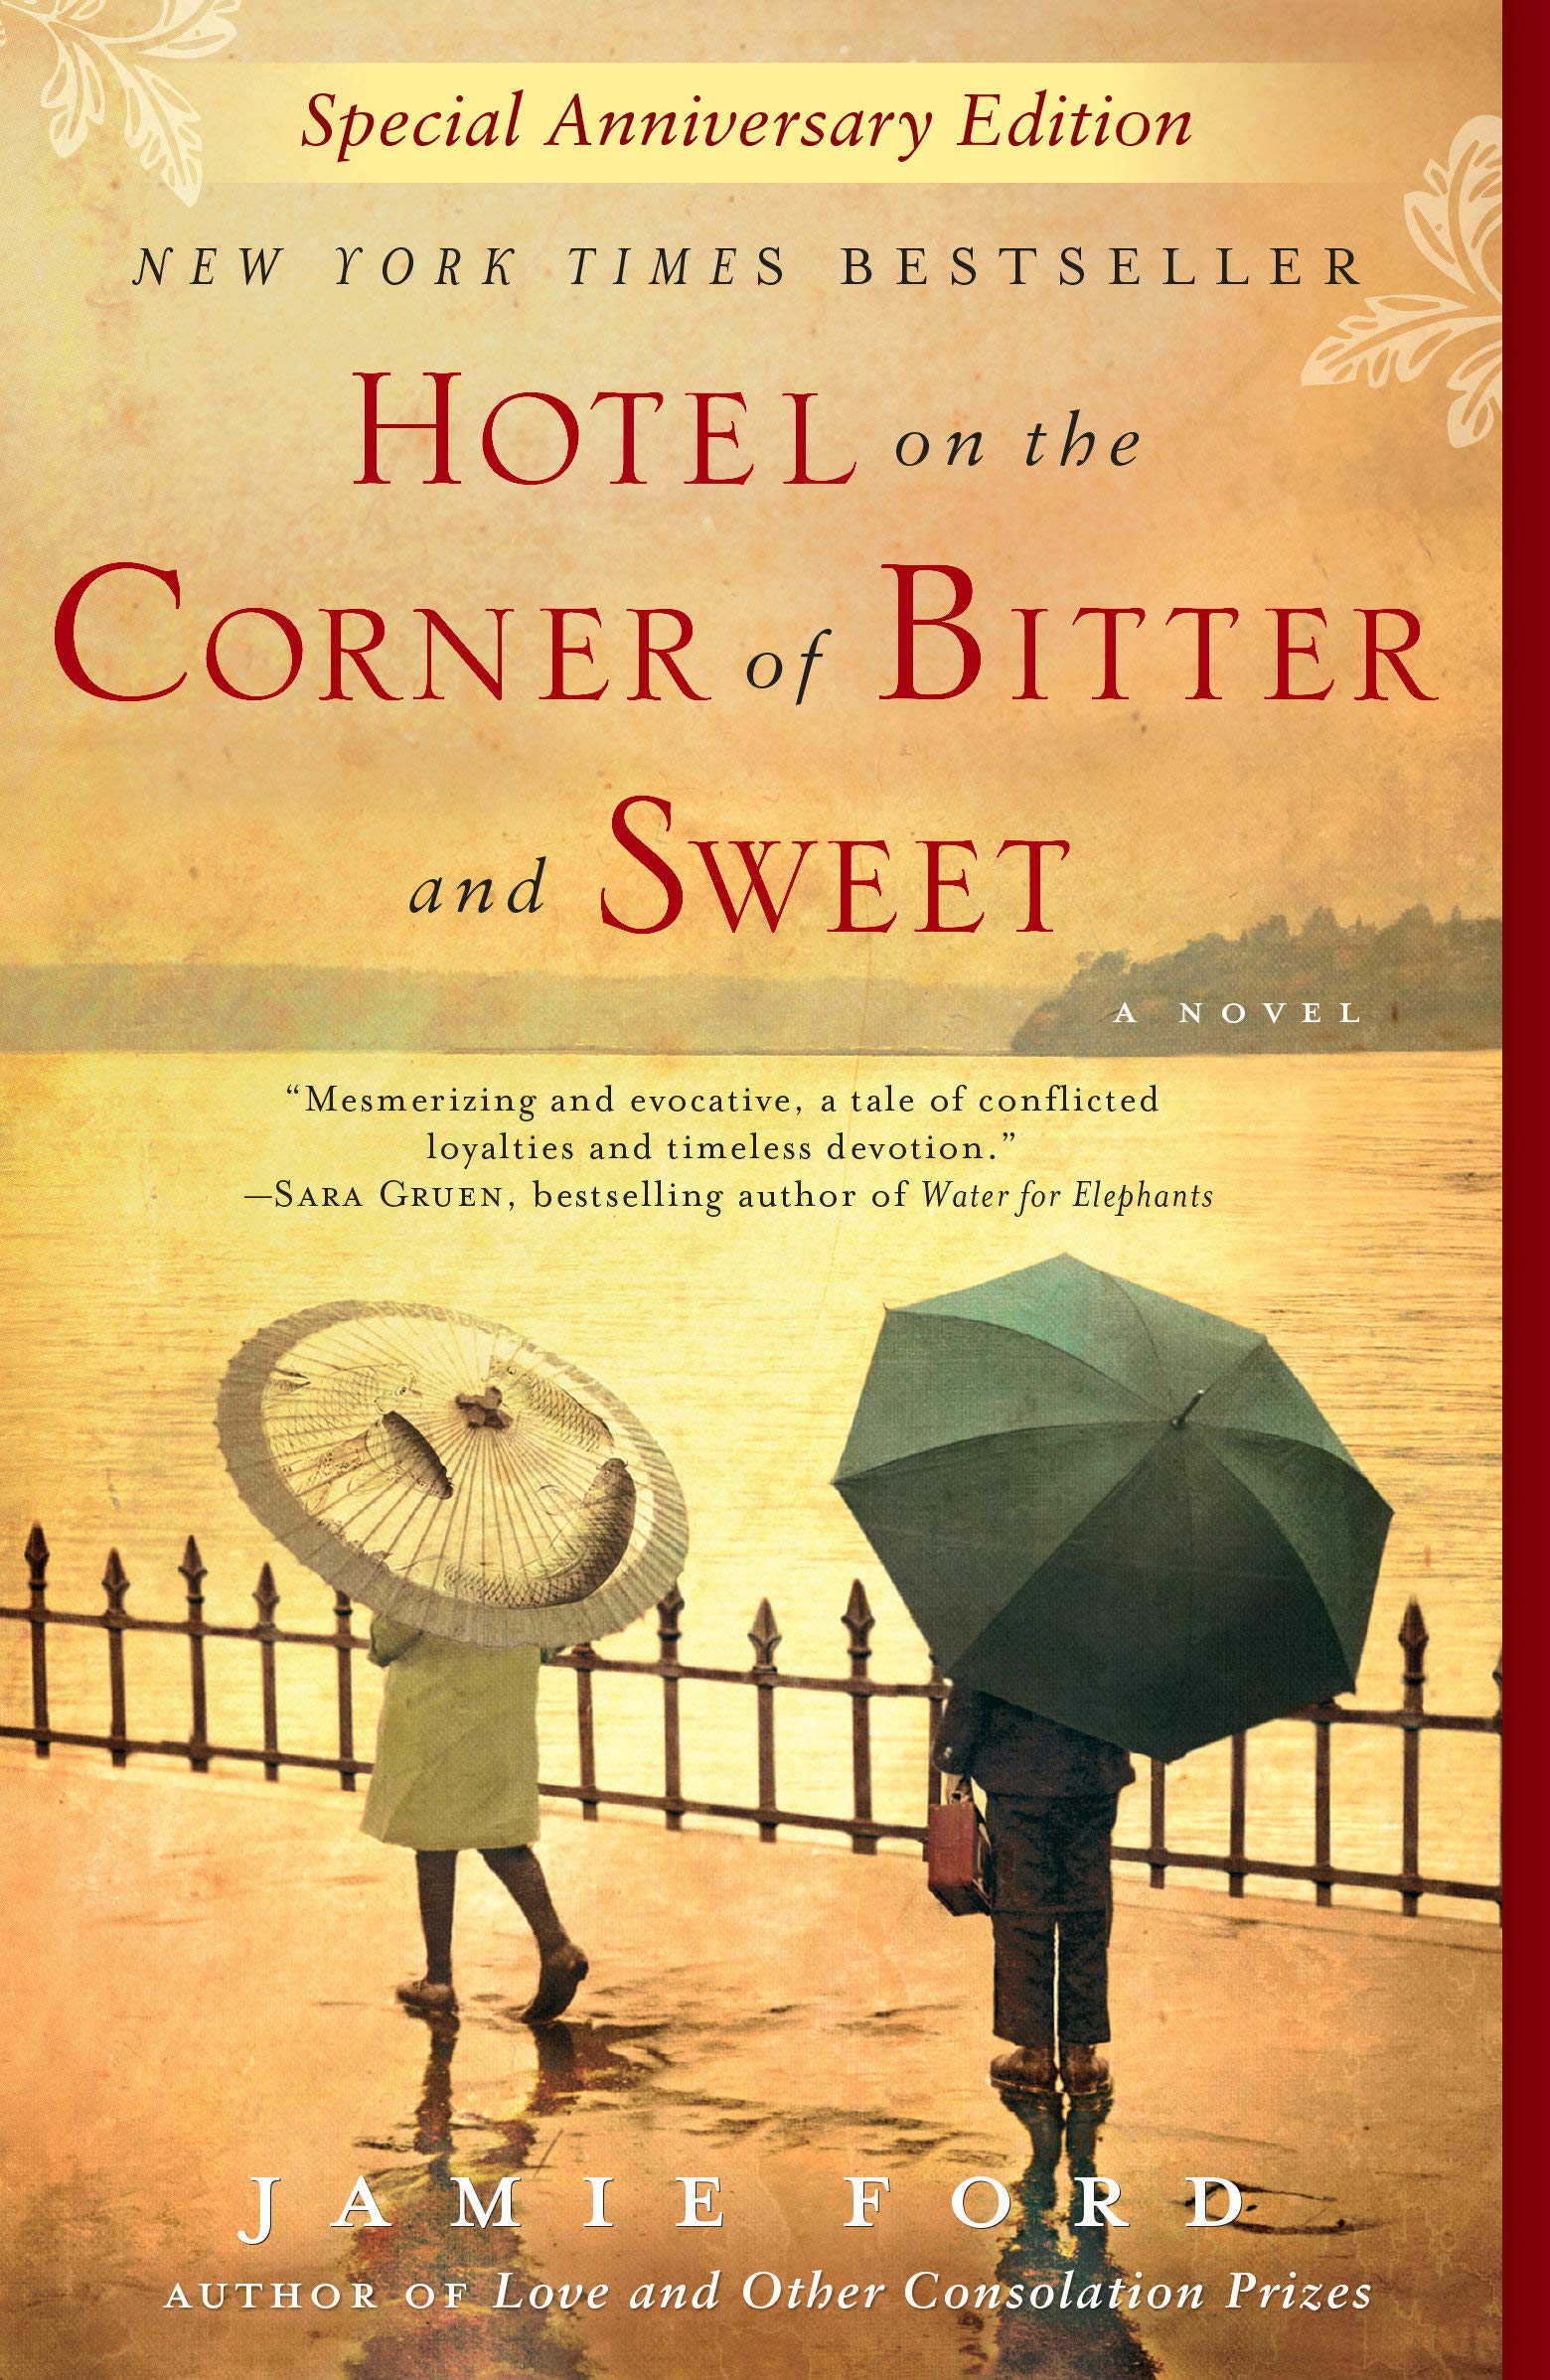 See Hotel on the Corner of Bitter and Sweet in Library Catalog